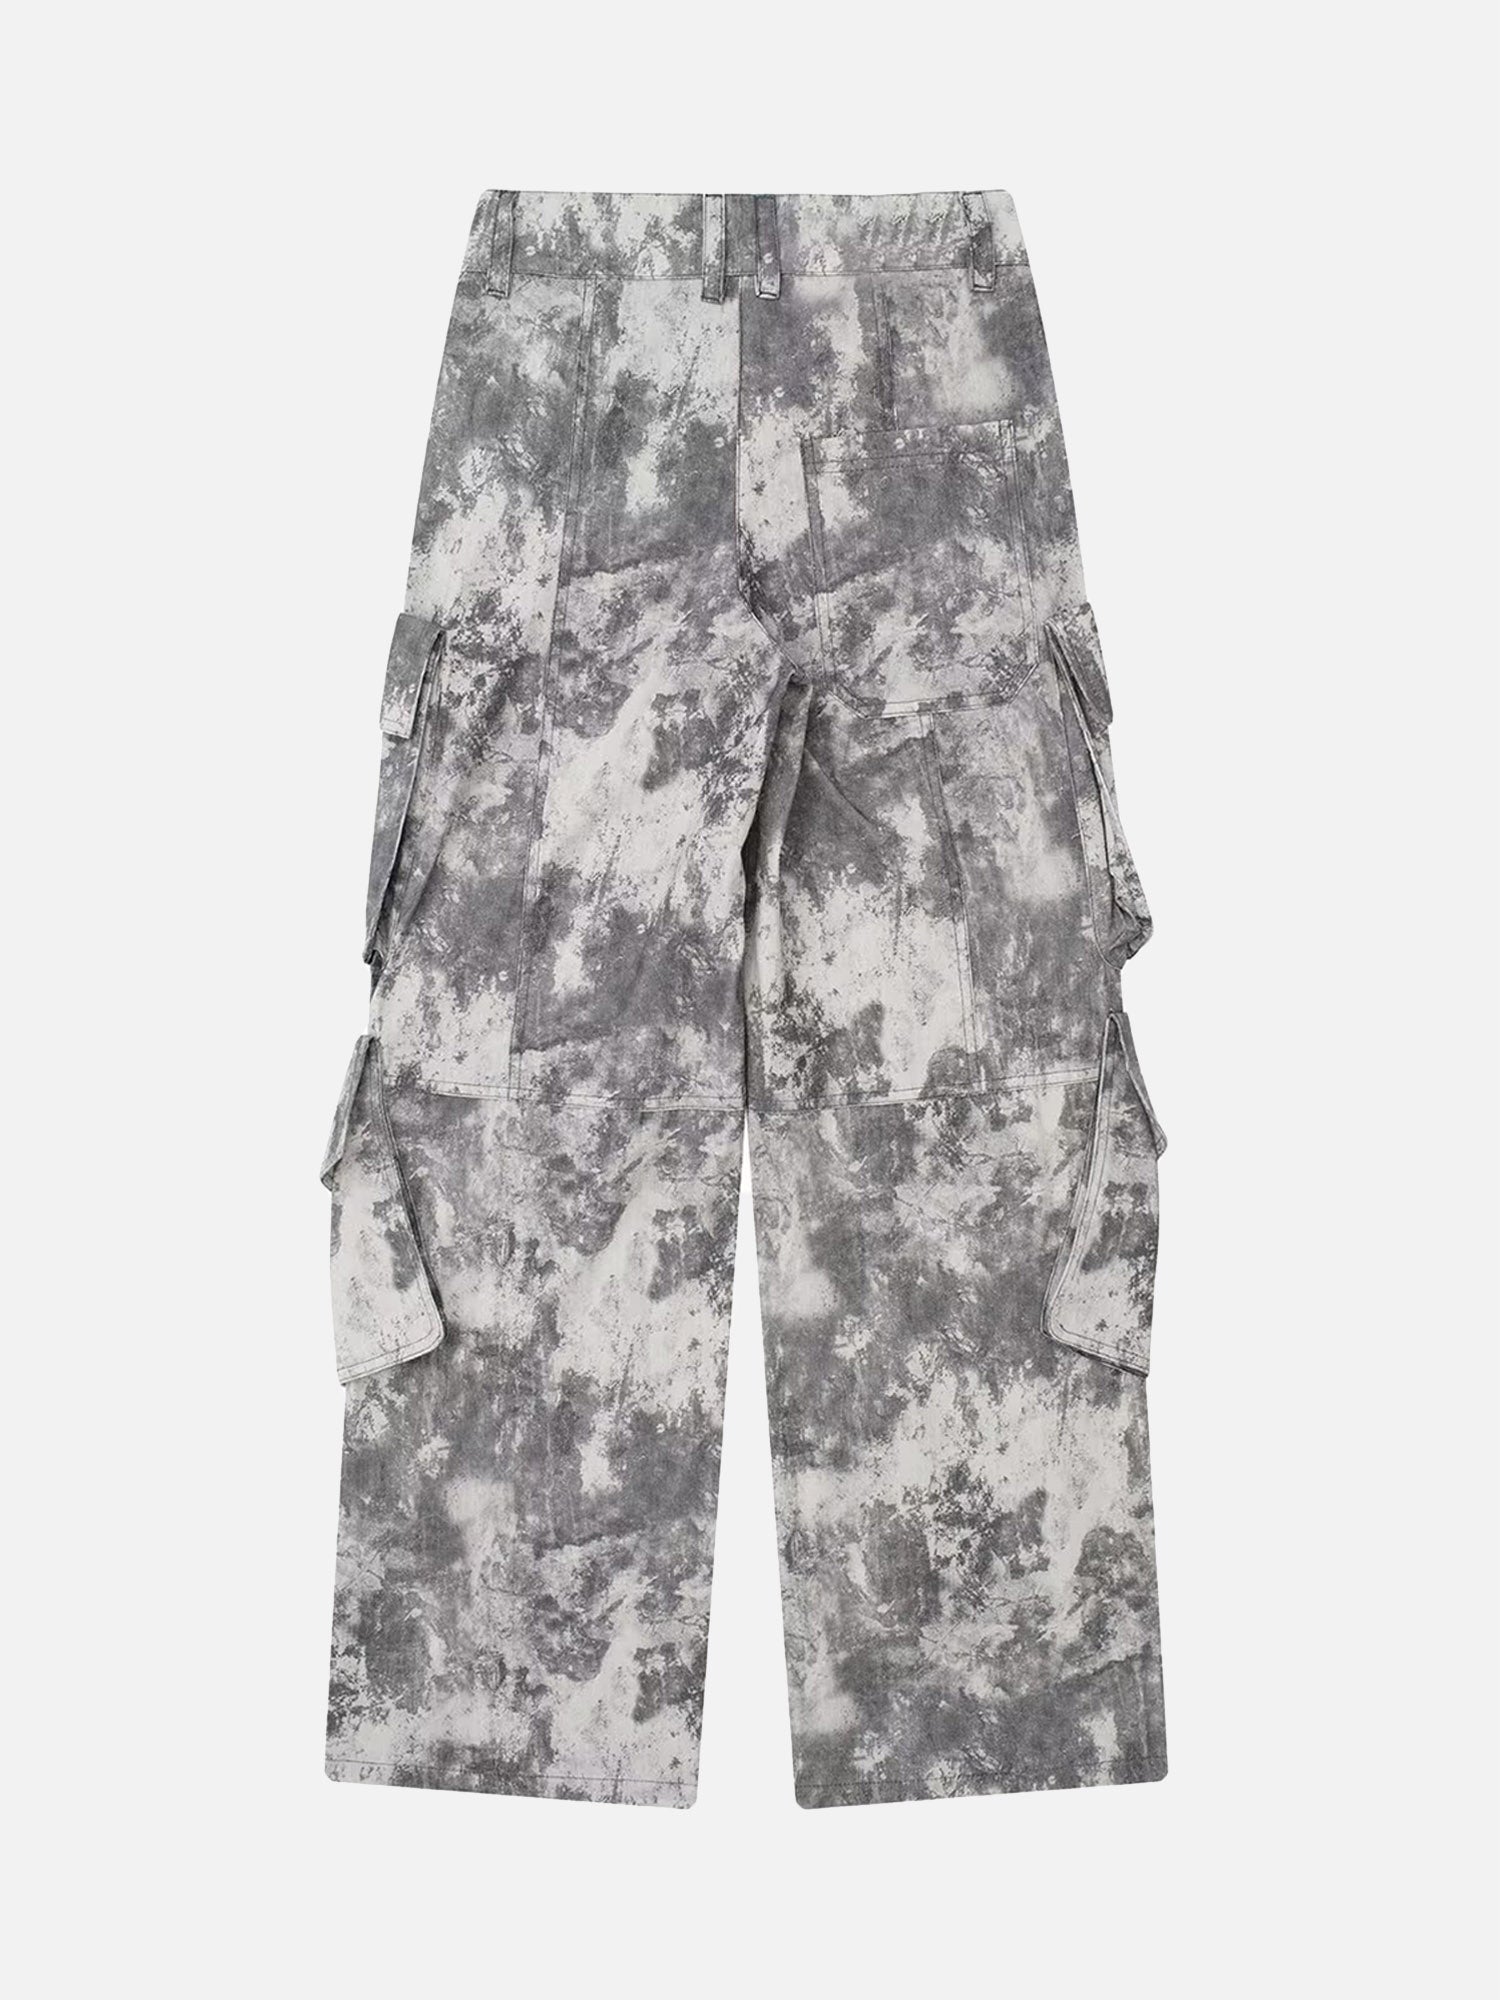 Thesupermade French Loose Pocket Printed Mid-rise Cargo Pants